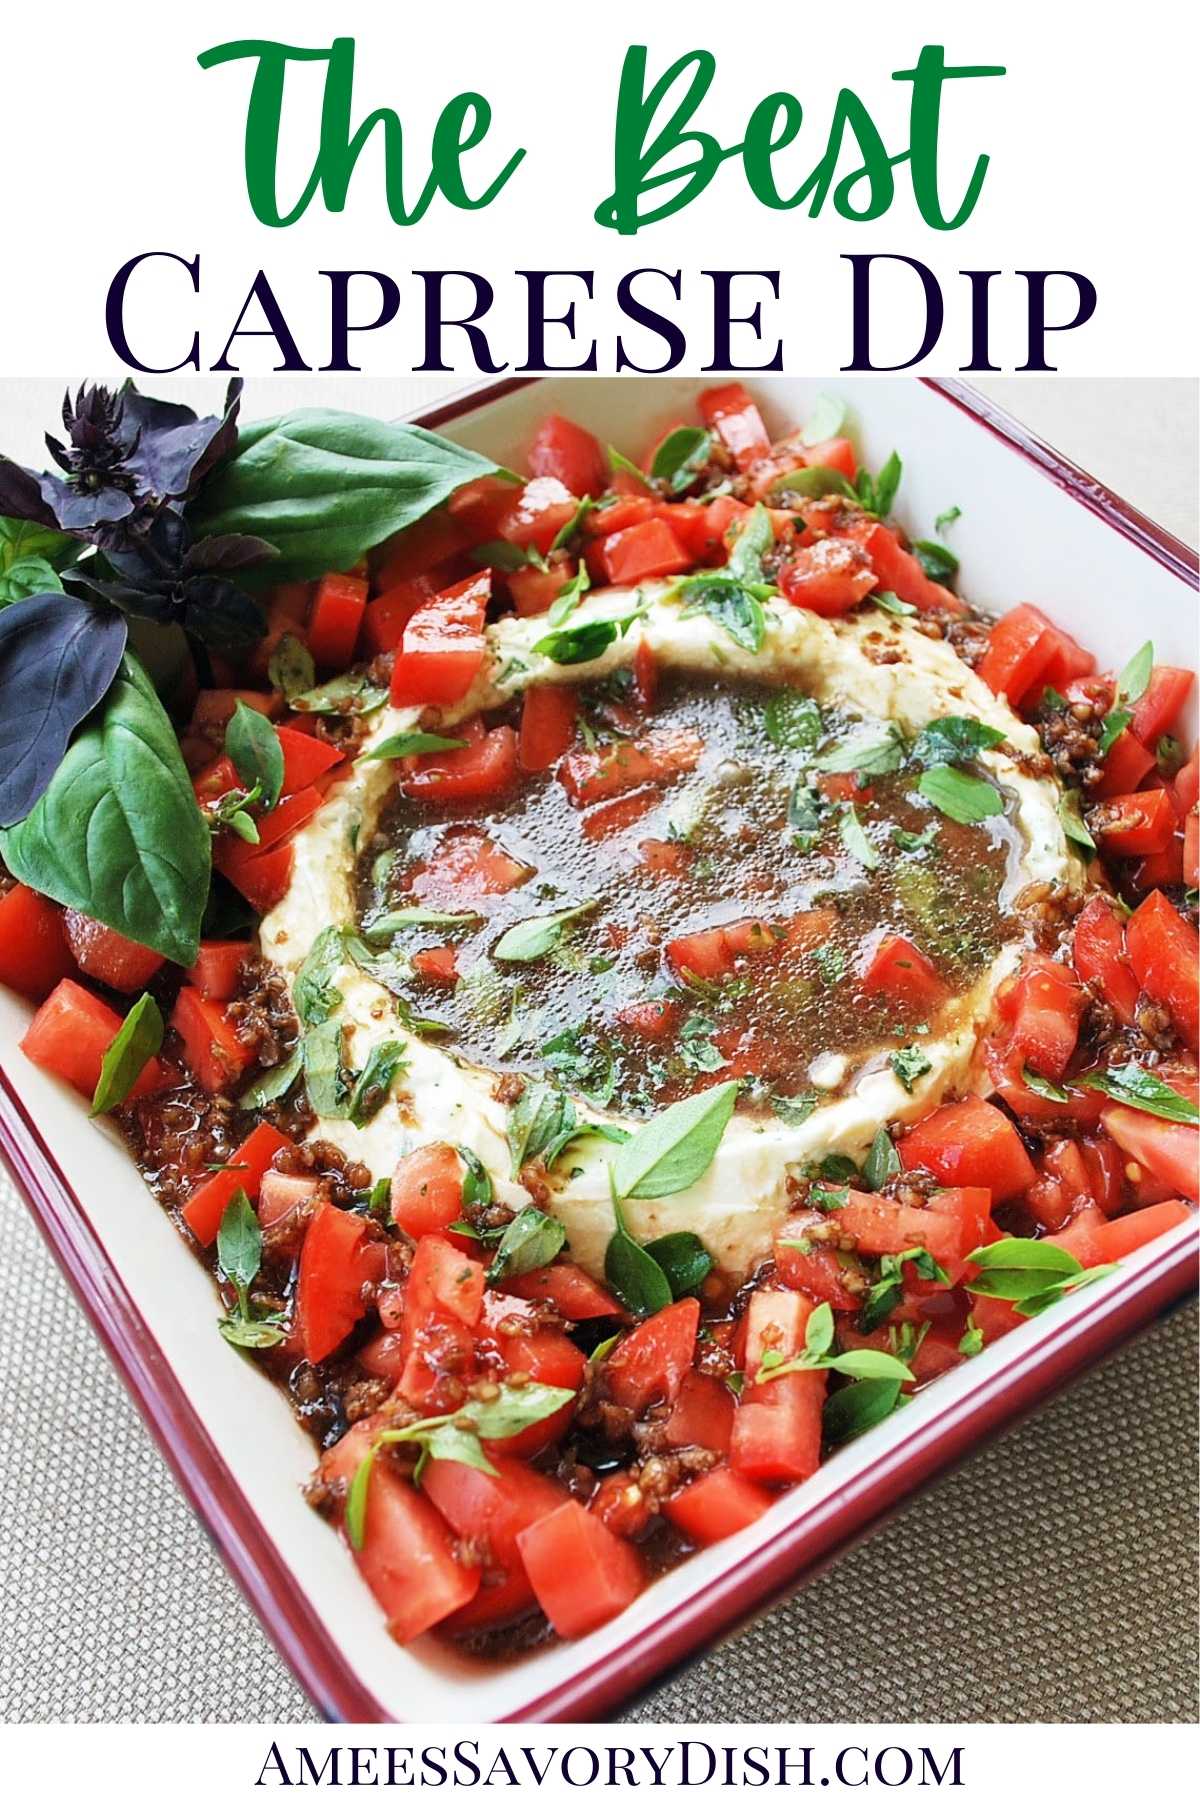 This Caprese dip is so good, you may not save any room for dinner!  Fresh tomatoes and basil, plus two kinds of cheese, drizzled with balsamic vinaigrette. You'll love this healthy dip recipe! #capresedip #caprese #easyappetizers #summerappetizer #capreseappetizer #appetizerrecipe via @Ameessavorydish